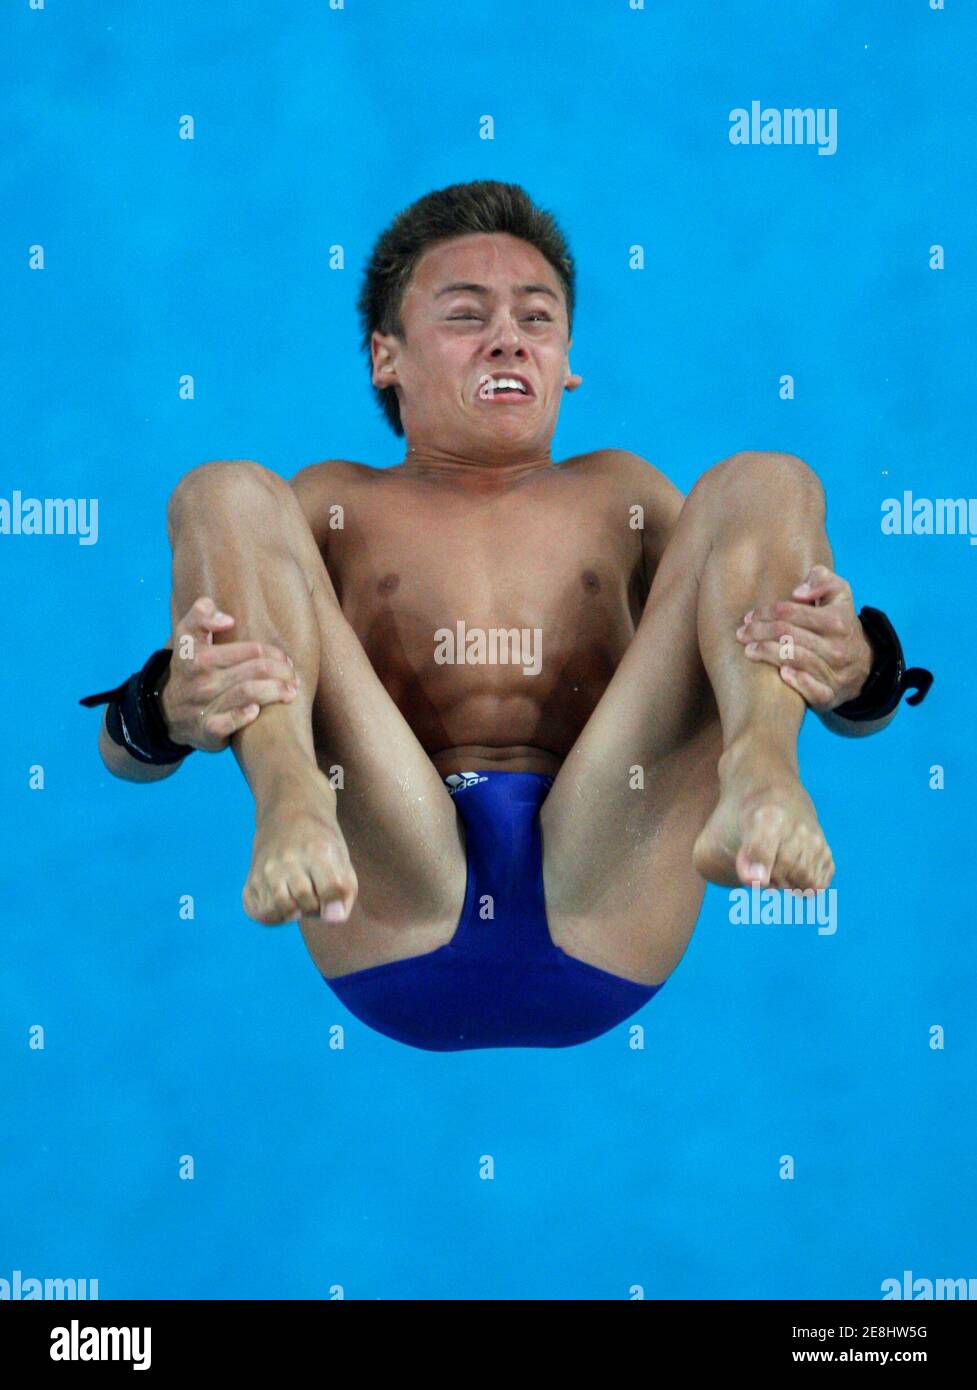 Tom Daley of Britain dives in the men's 10m platform preliminary round at  the Beijing 2008 Olympic Games August 22, 2008. REUTERS/Jason Reed (CHINA  Stock Photo - Alamy